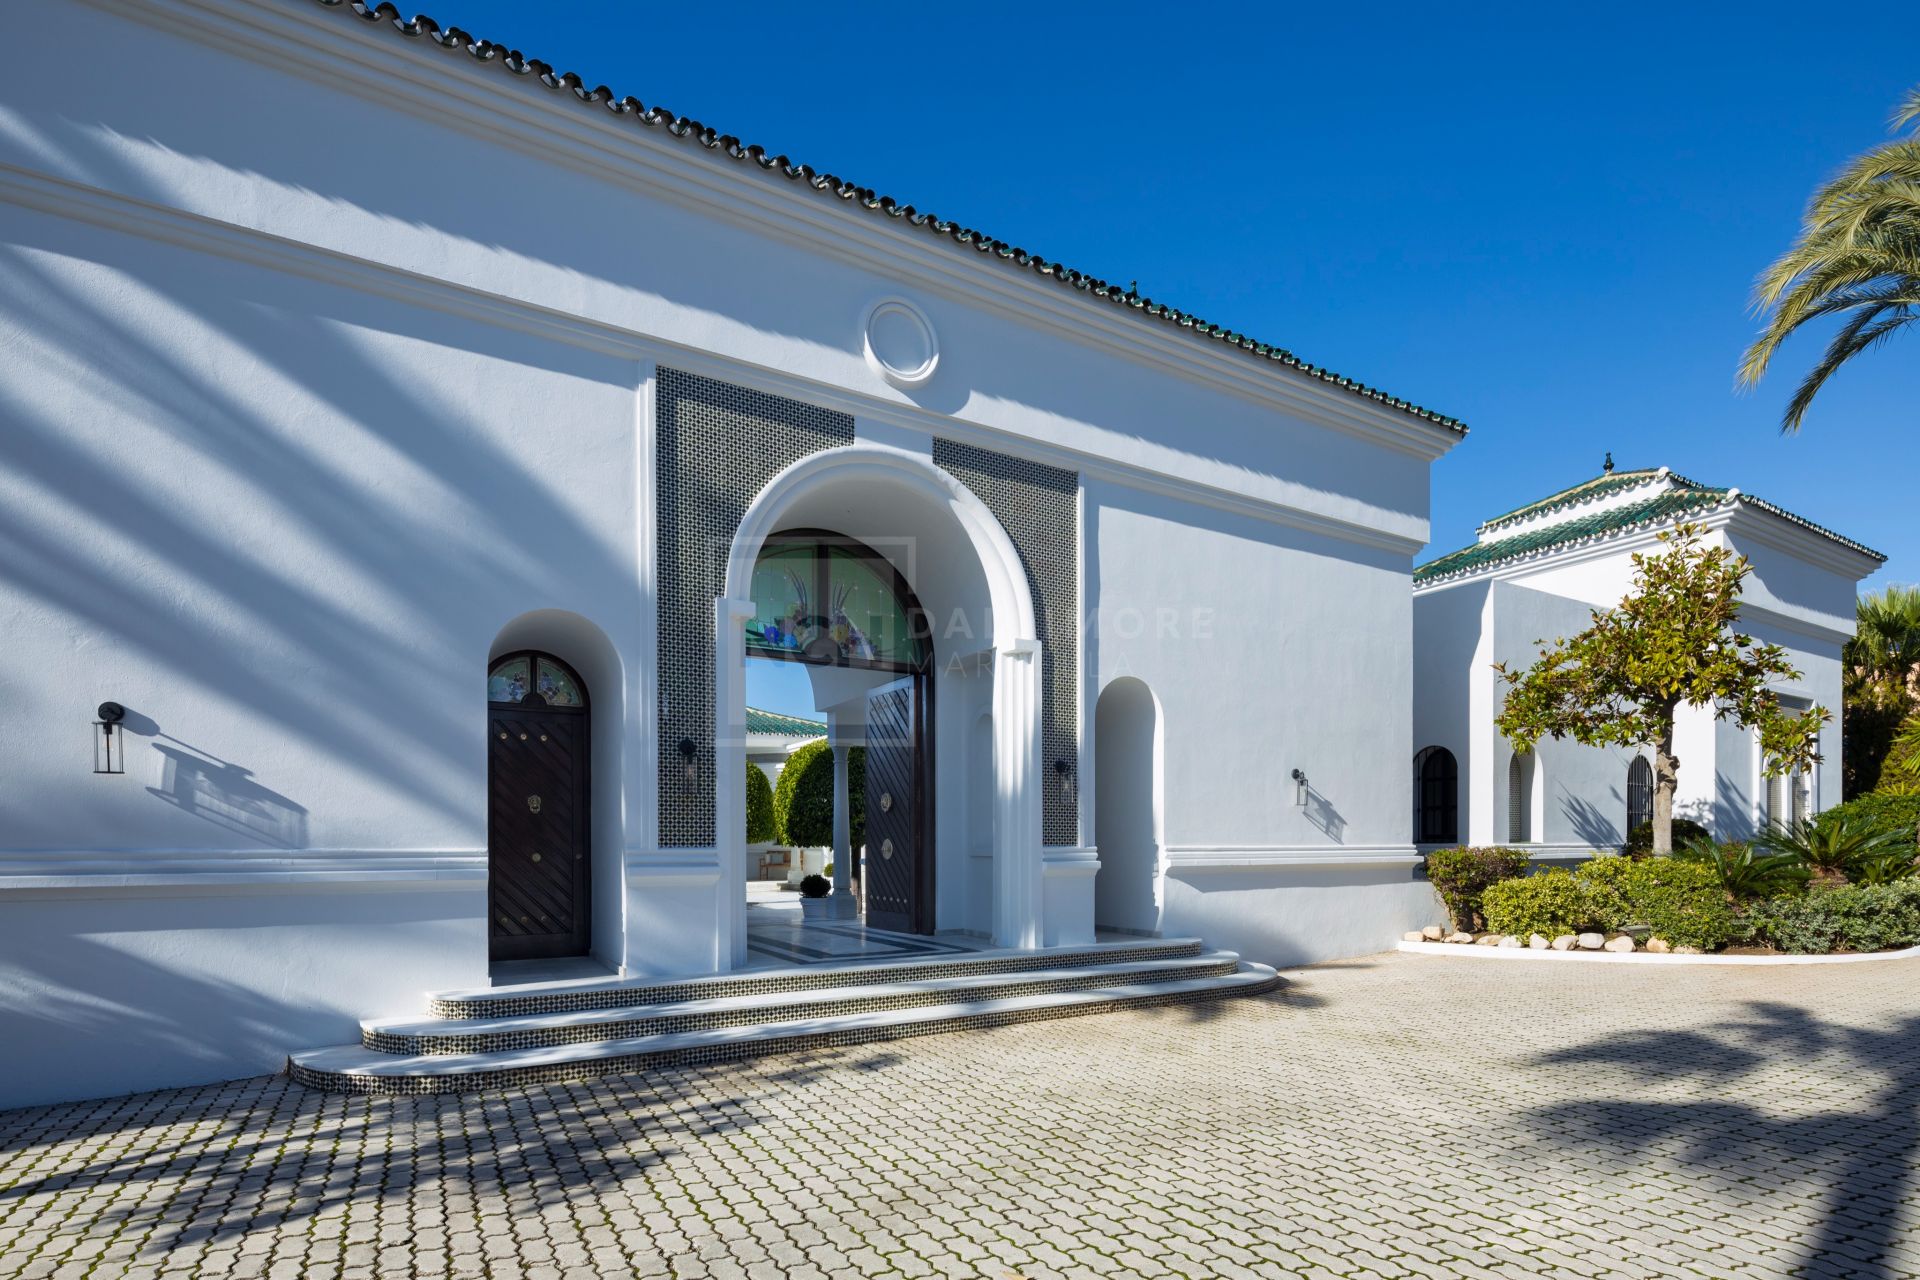 ONE-OF-A-KIND-PALACE LOCATED IN NUEVA ANDALUCIA